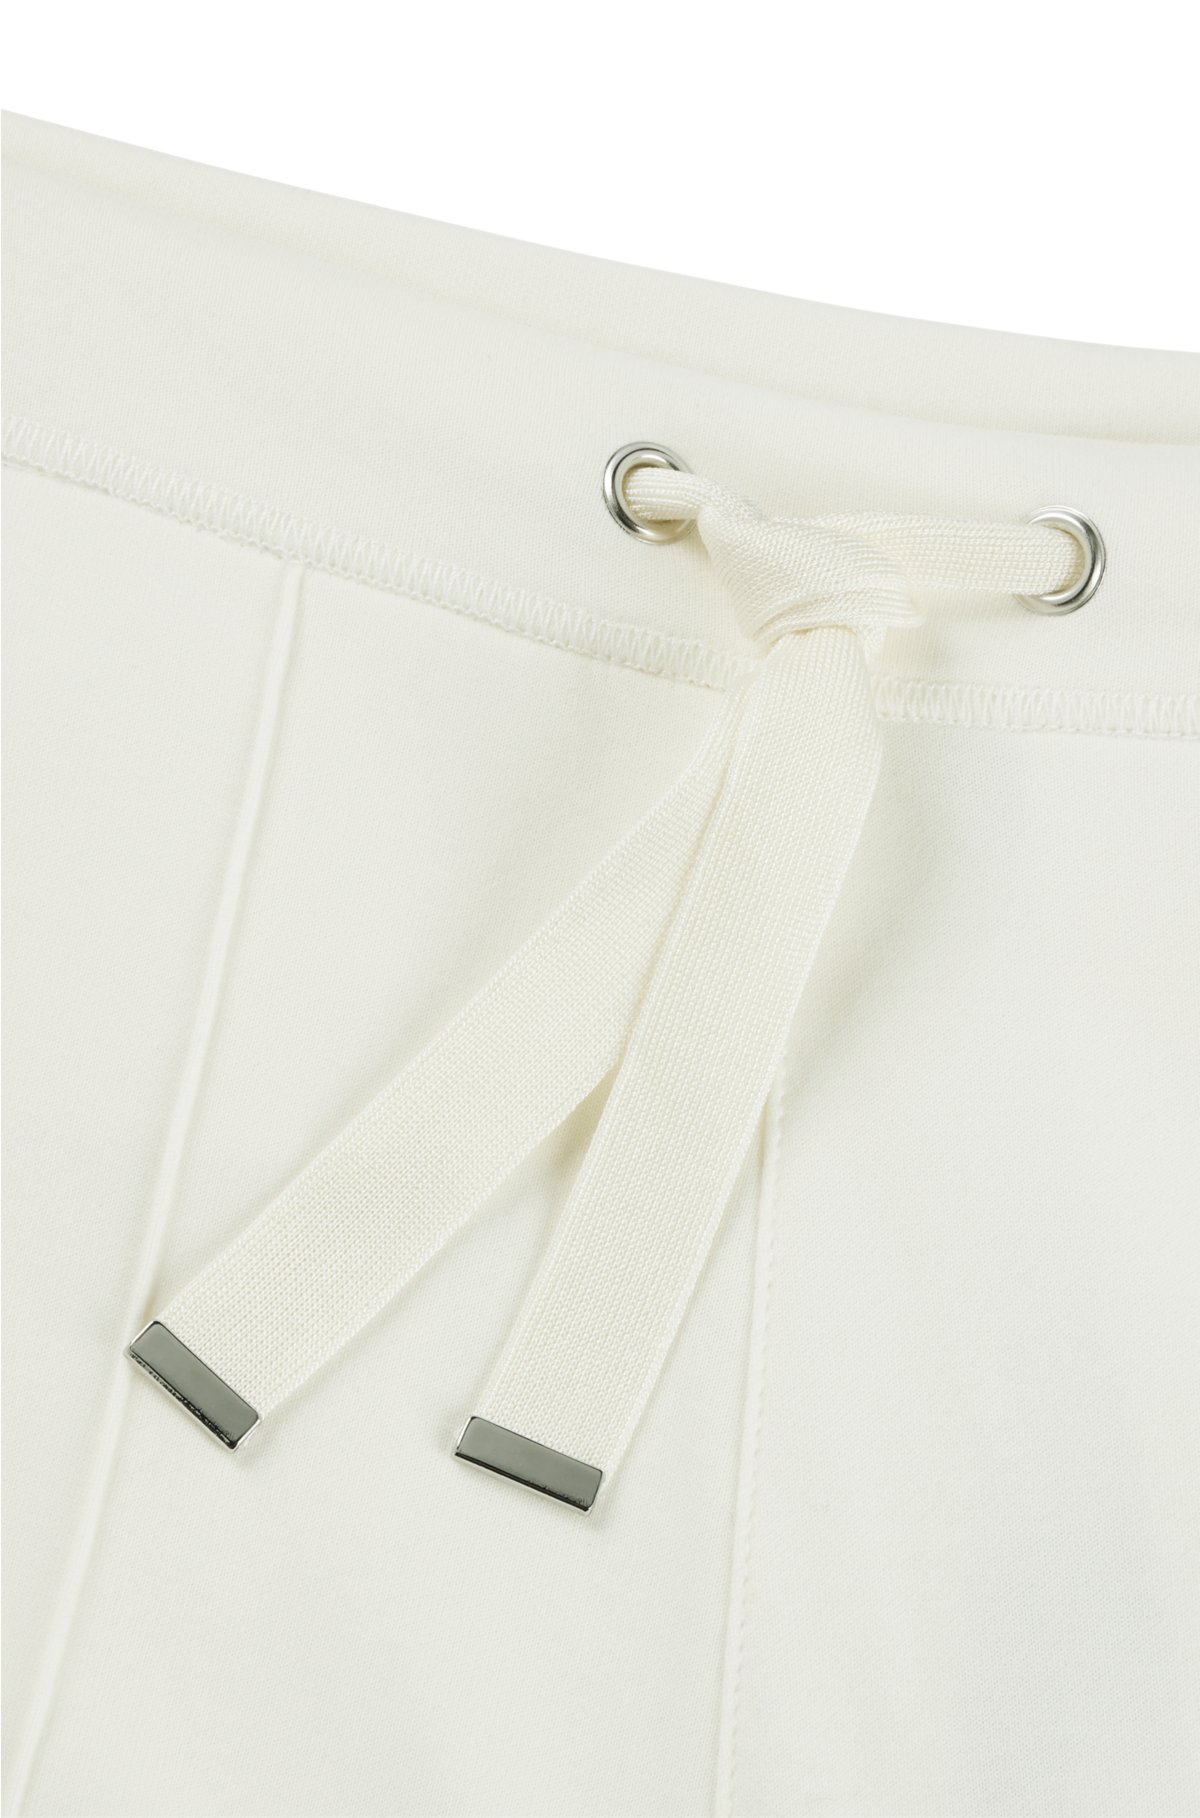 Cotton-blend drawstring trousers with tape trims, White